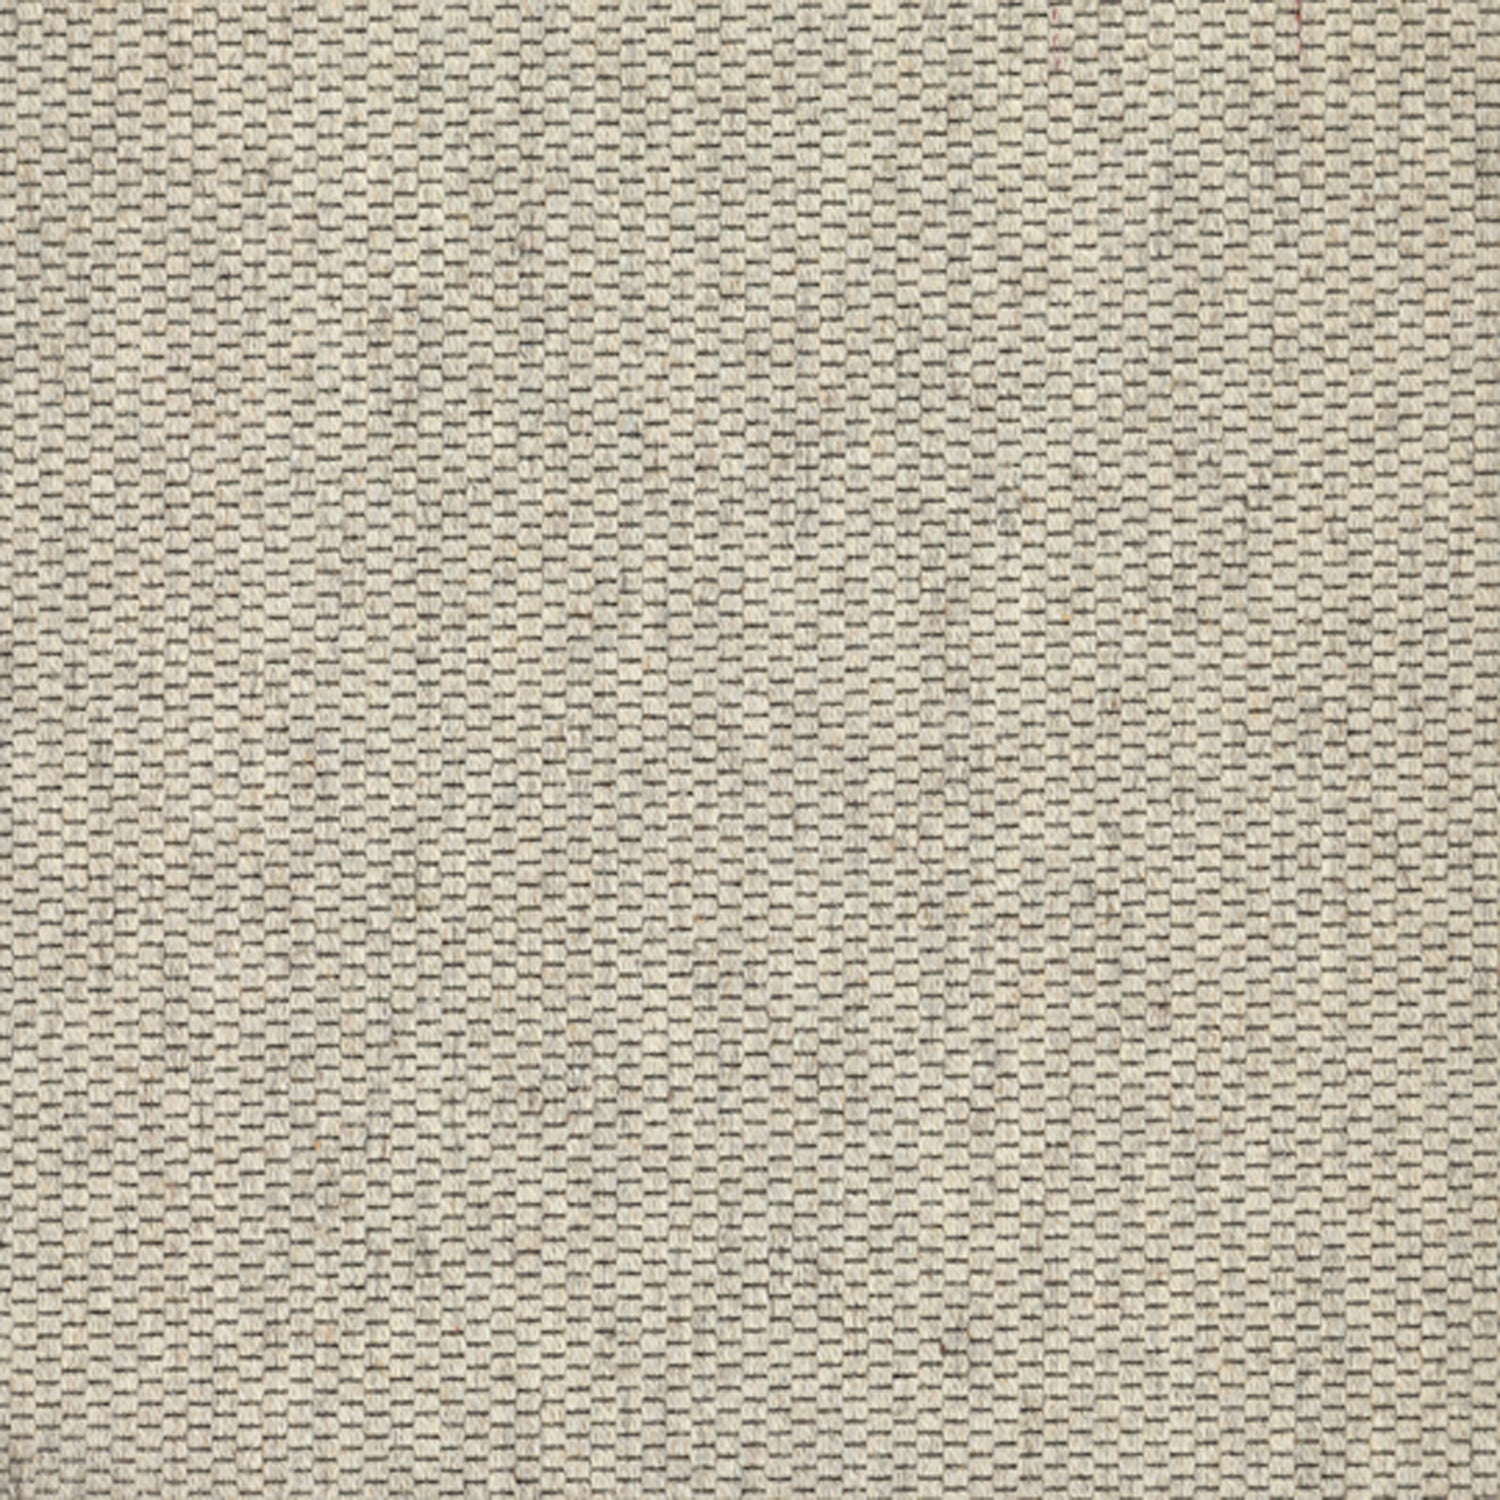 Wool broadloom carpet swatch in a flat grid weave in cream and charcoal.